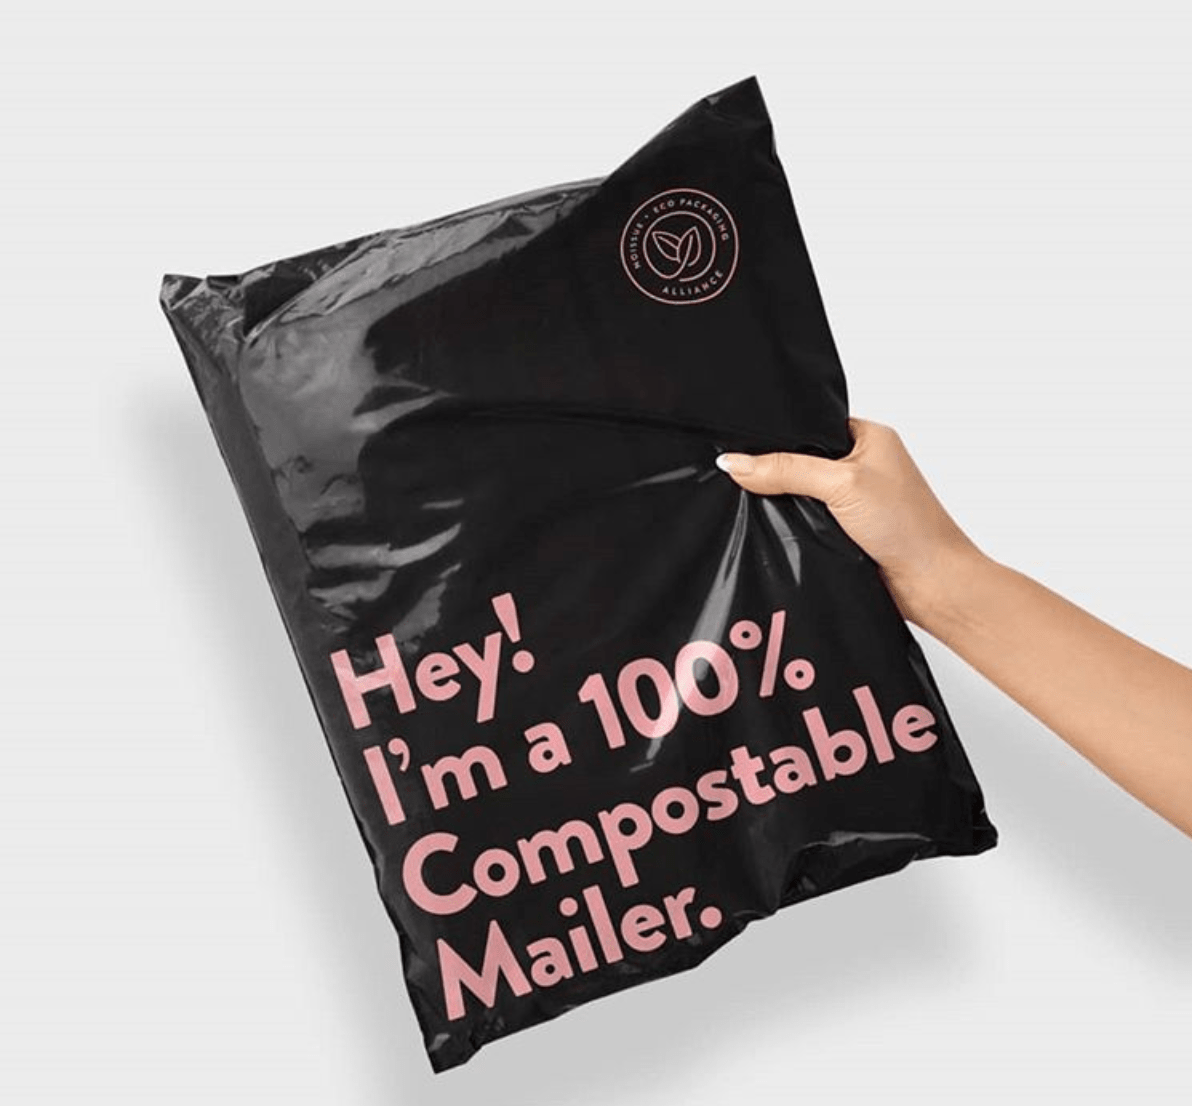 How To Dispose of Your Compostable Mailer